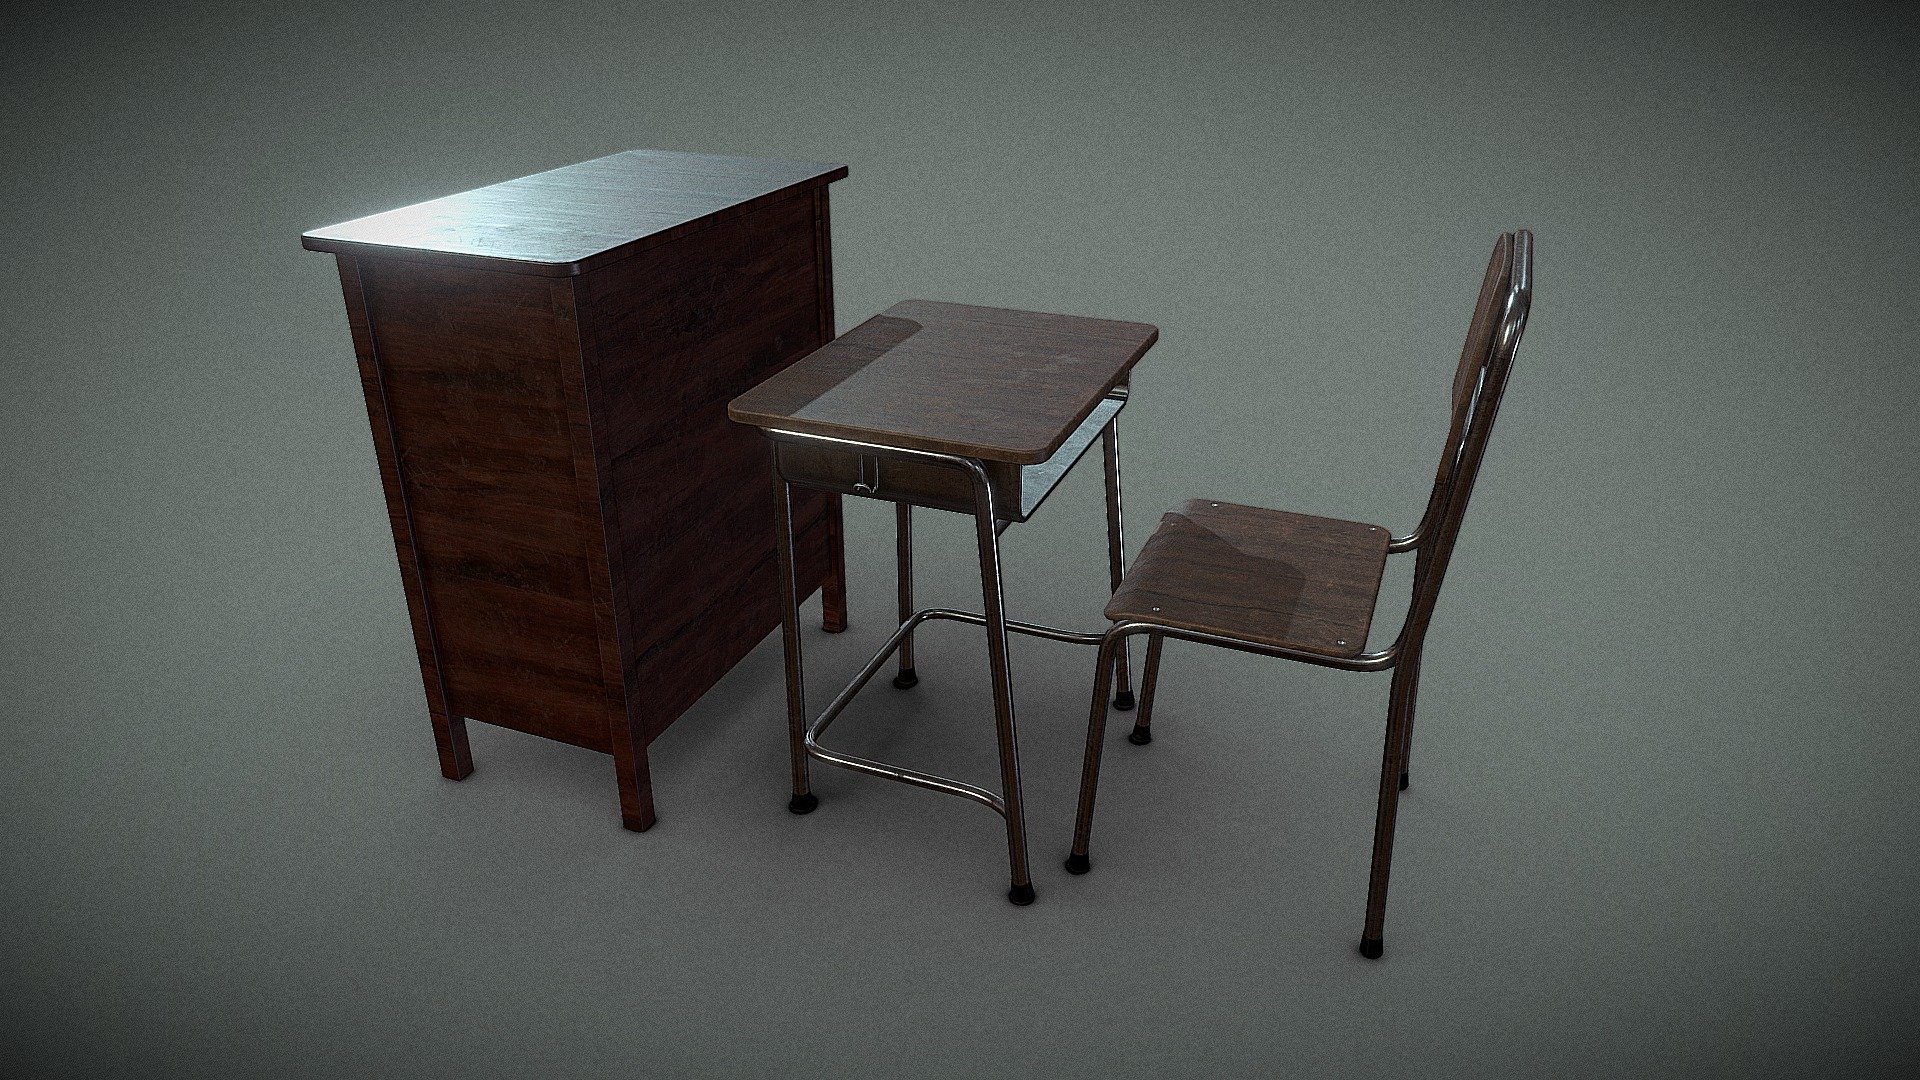 There are models of assets for classroom including student's desk and chair plus a standing desk for the teacher 3d model